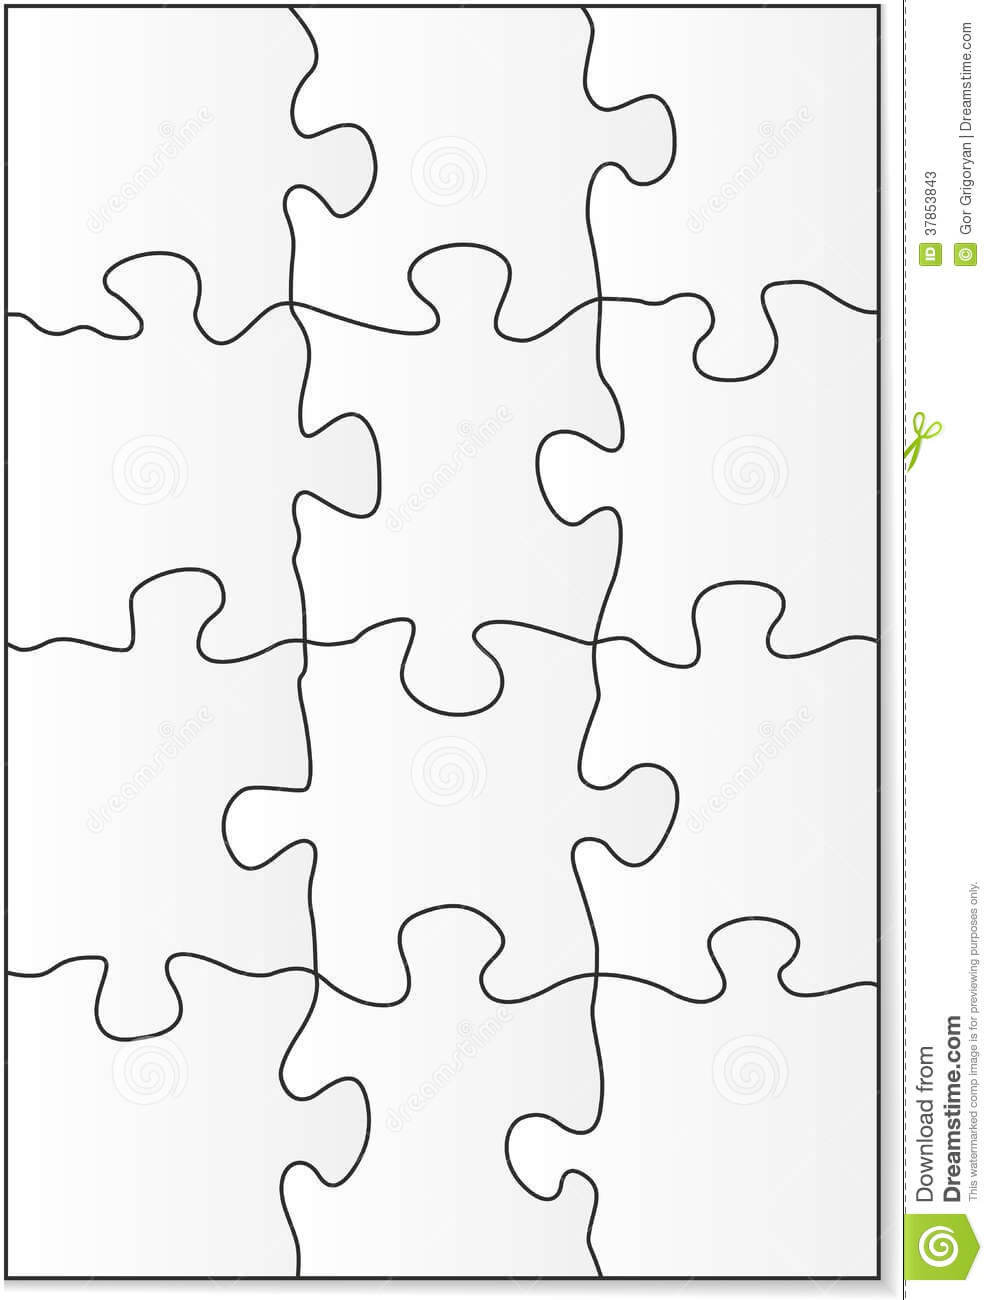 12 Piece Puzzle Template Stock Vector. Illustration Of For Blank Pattern Block Templates